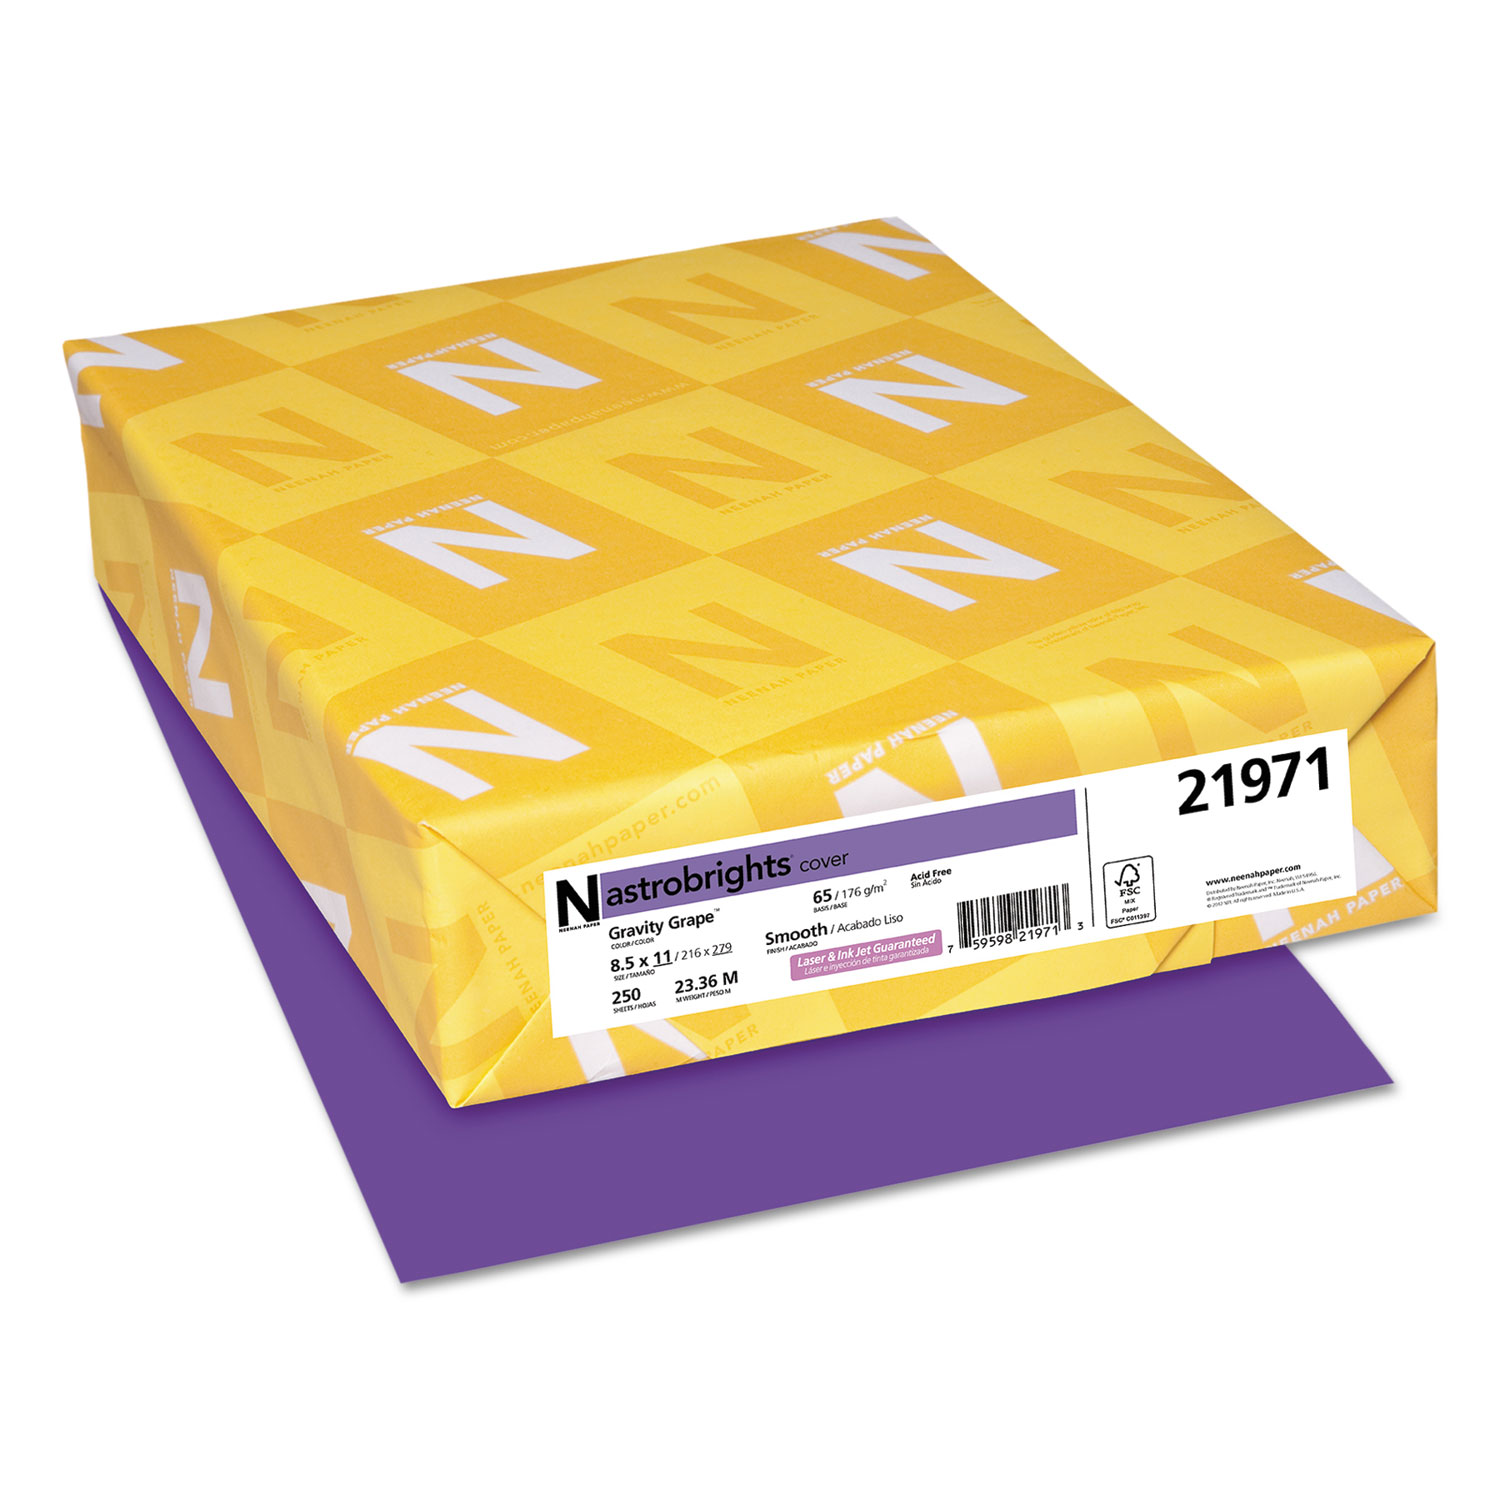  Astrobrights 21971 Color Cardstock, 65lb, 8.5 x 11, Gravity Grape, 250/Pack (WAU21971) 